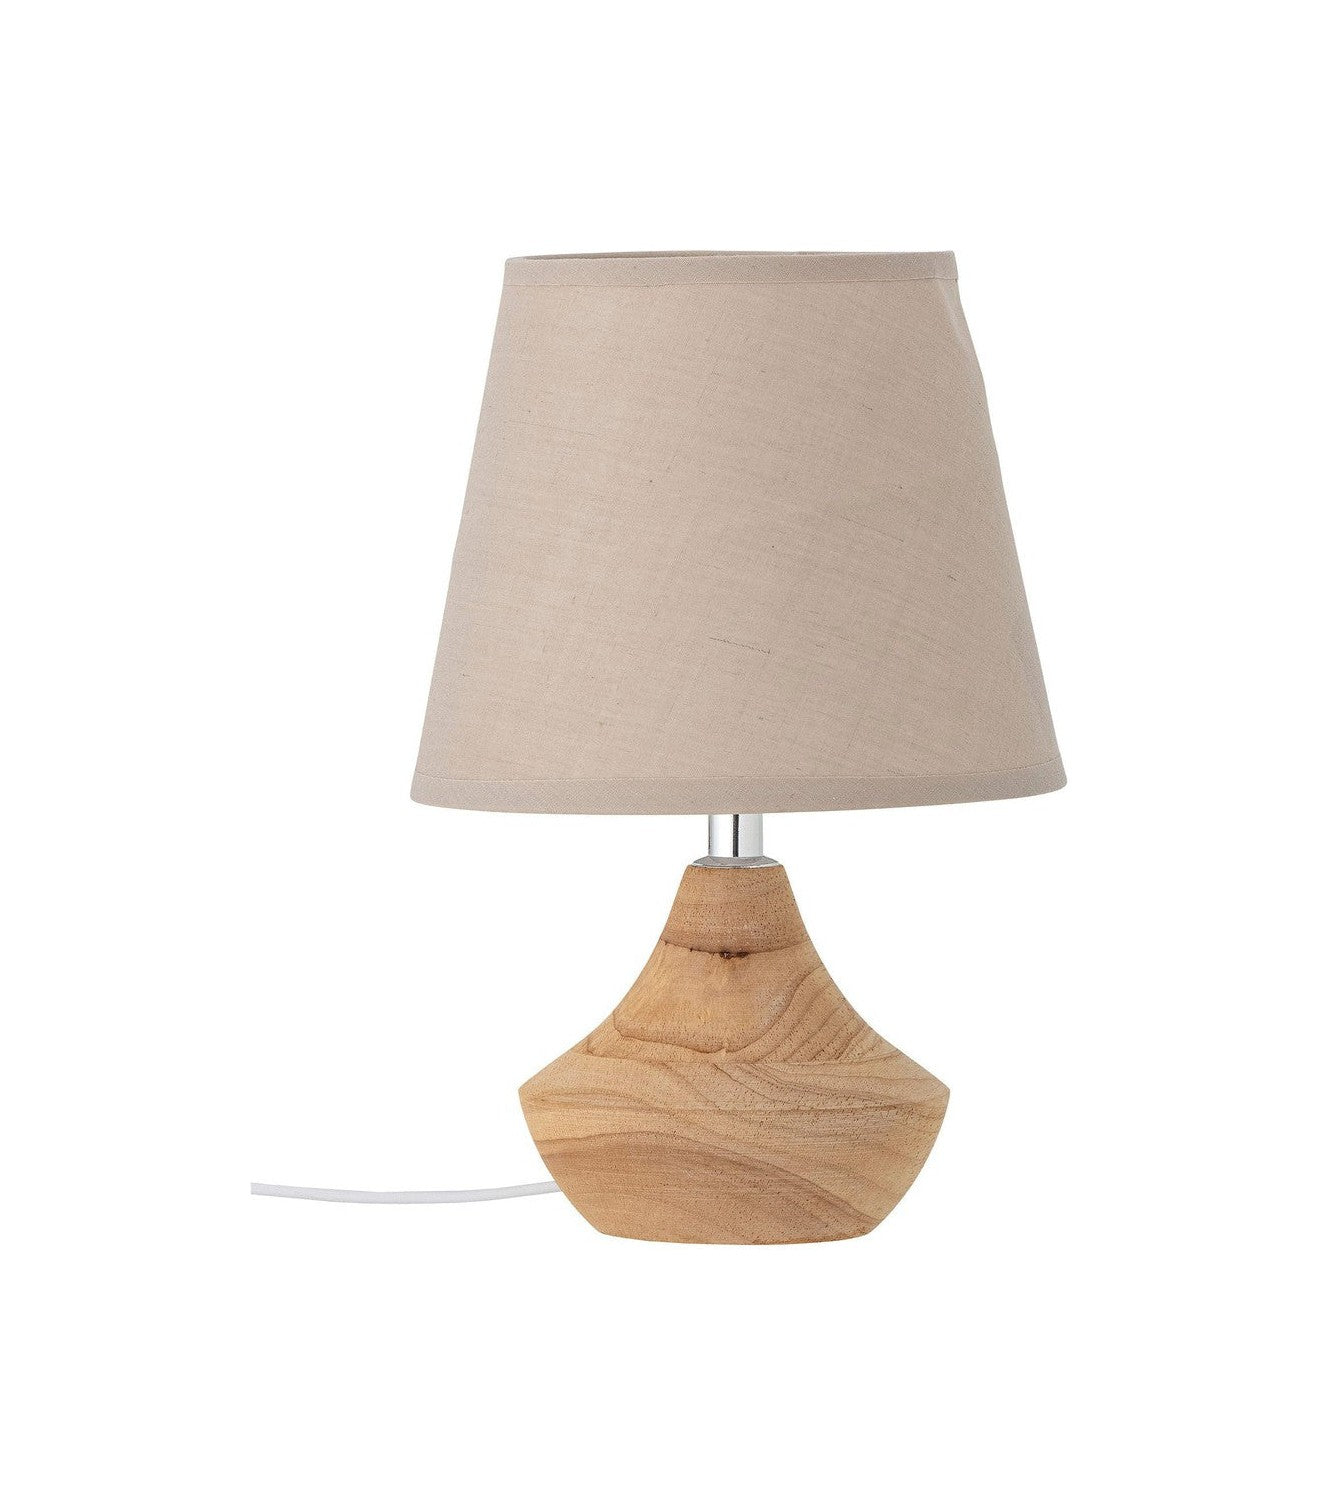 Creative Collection Panola Table lamp, Nature, Rubberwood